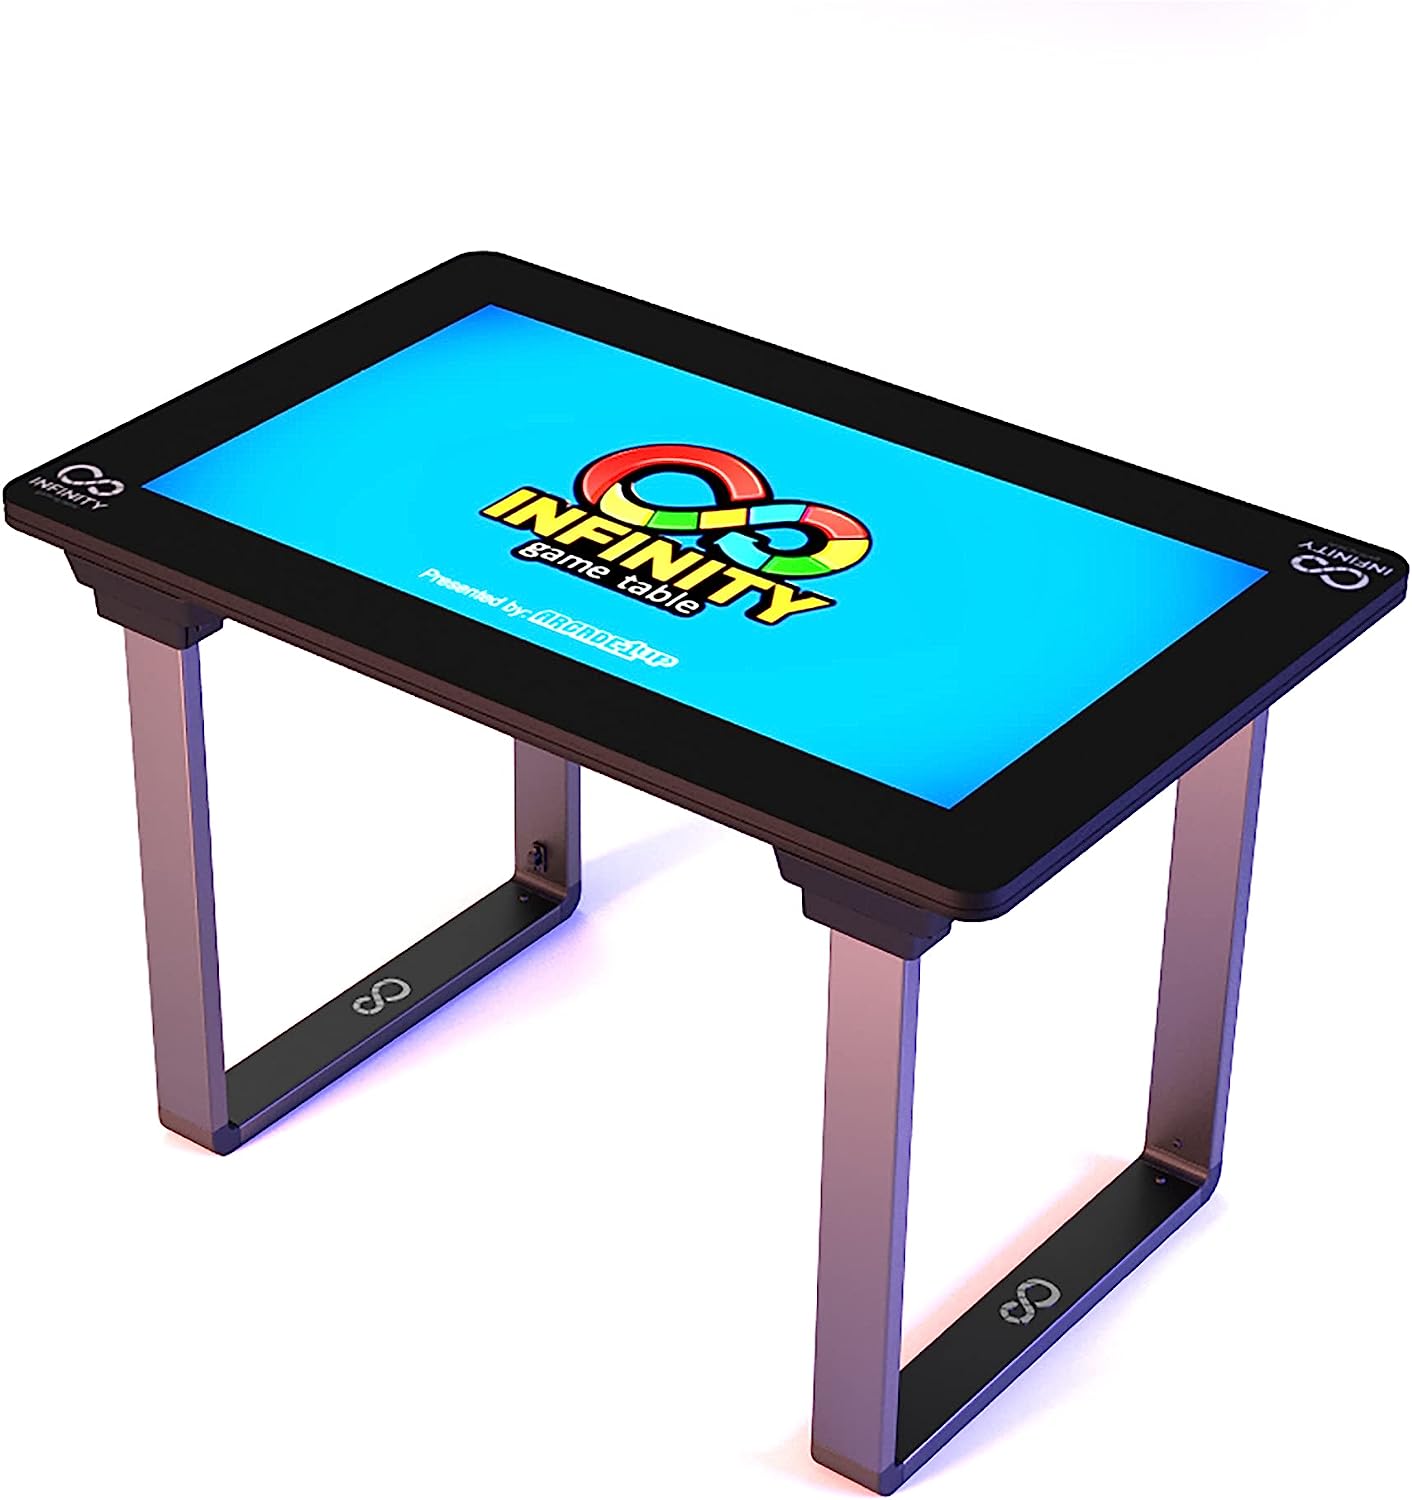 Arcade1Up Infinity Game Table - New